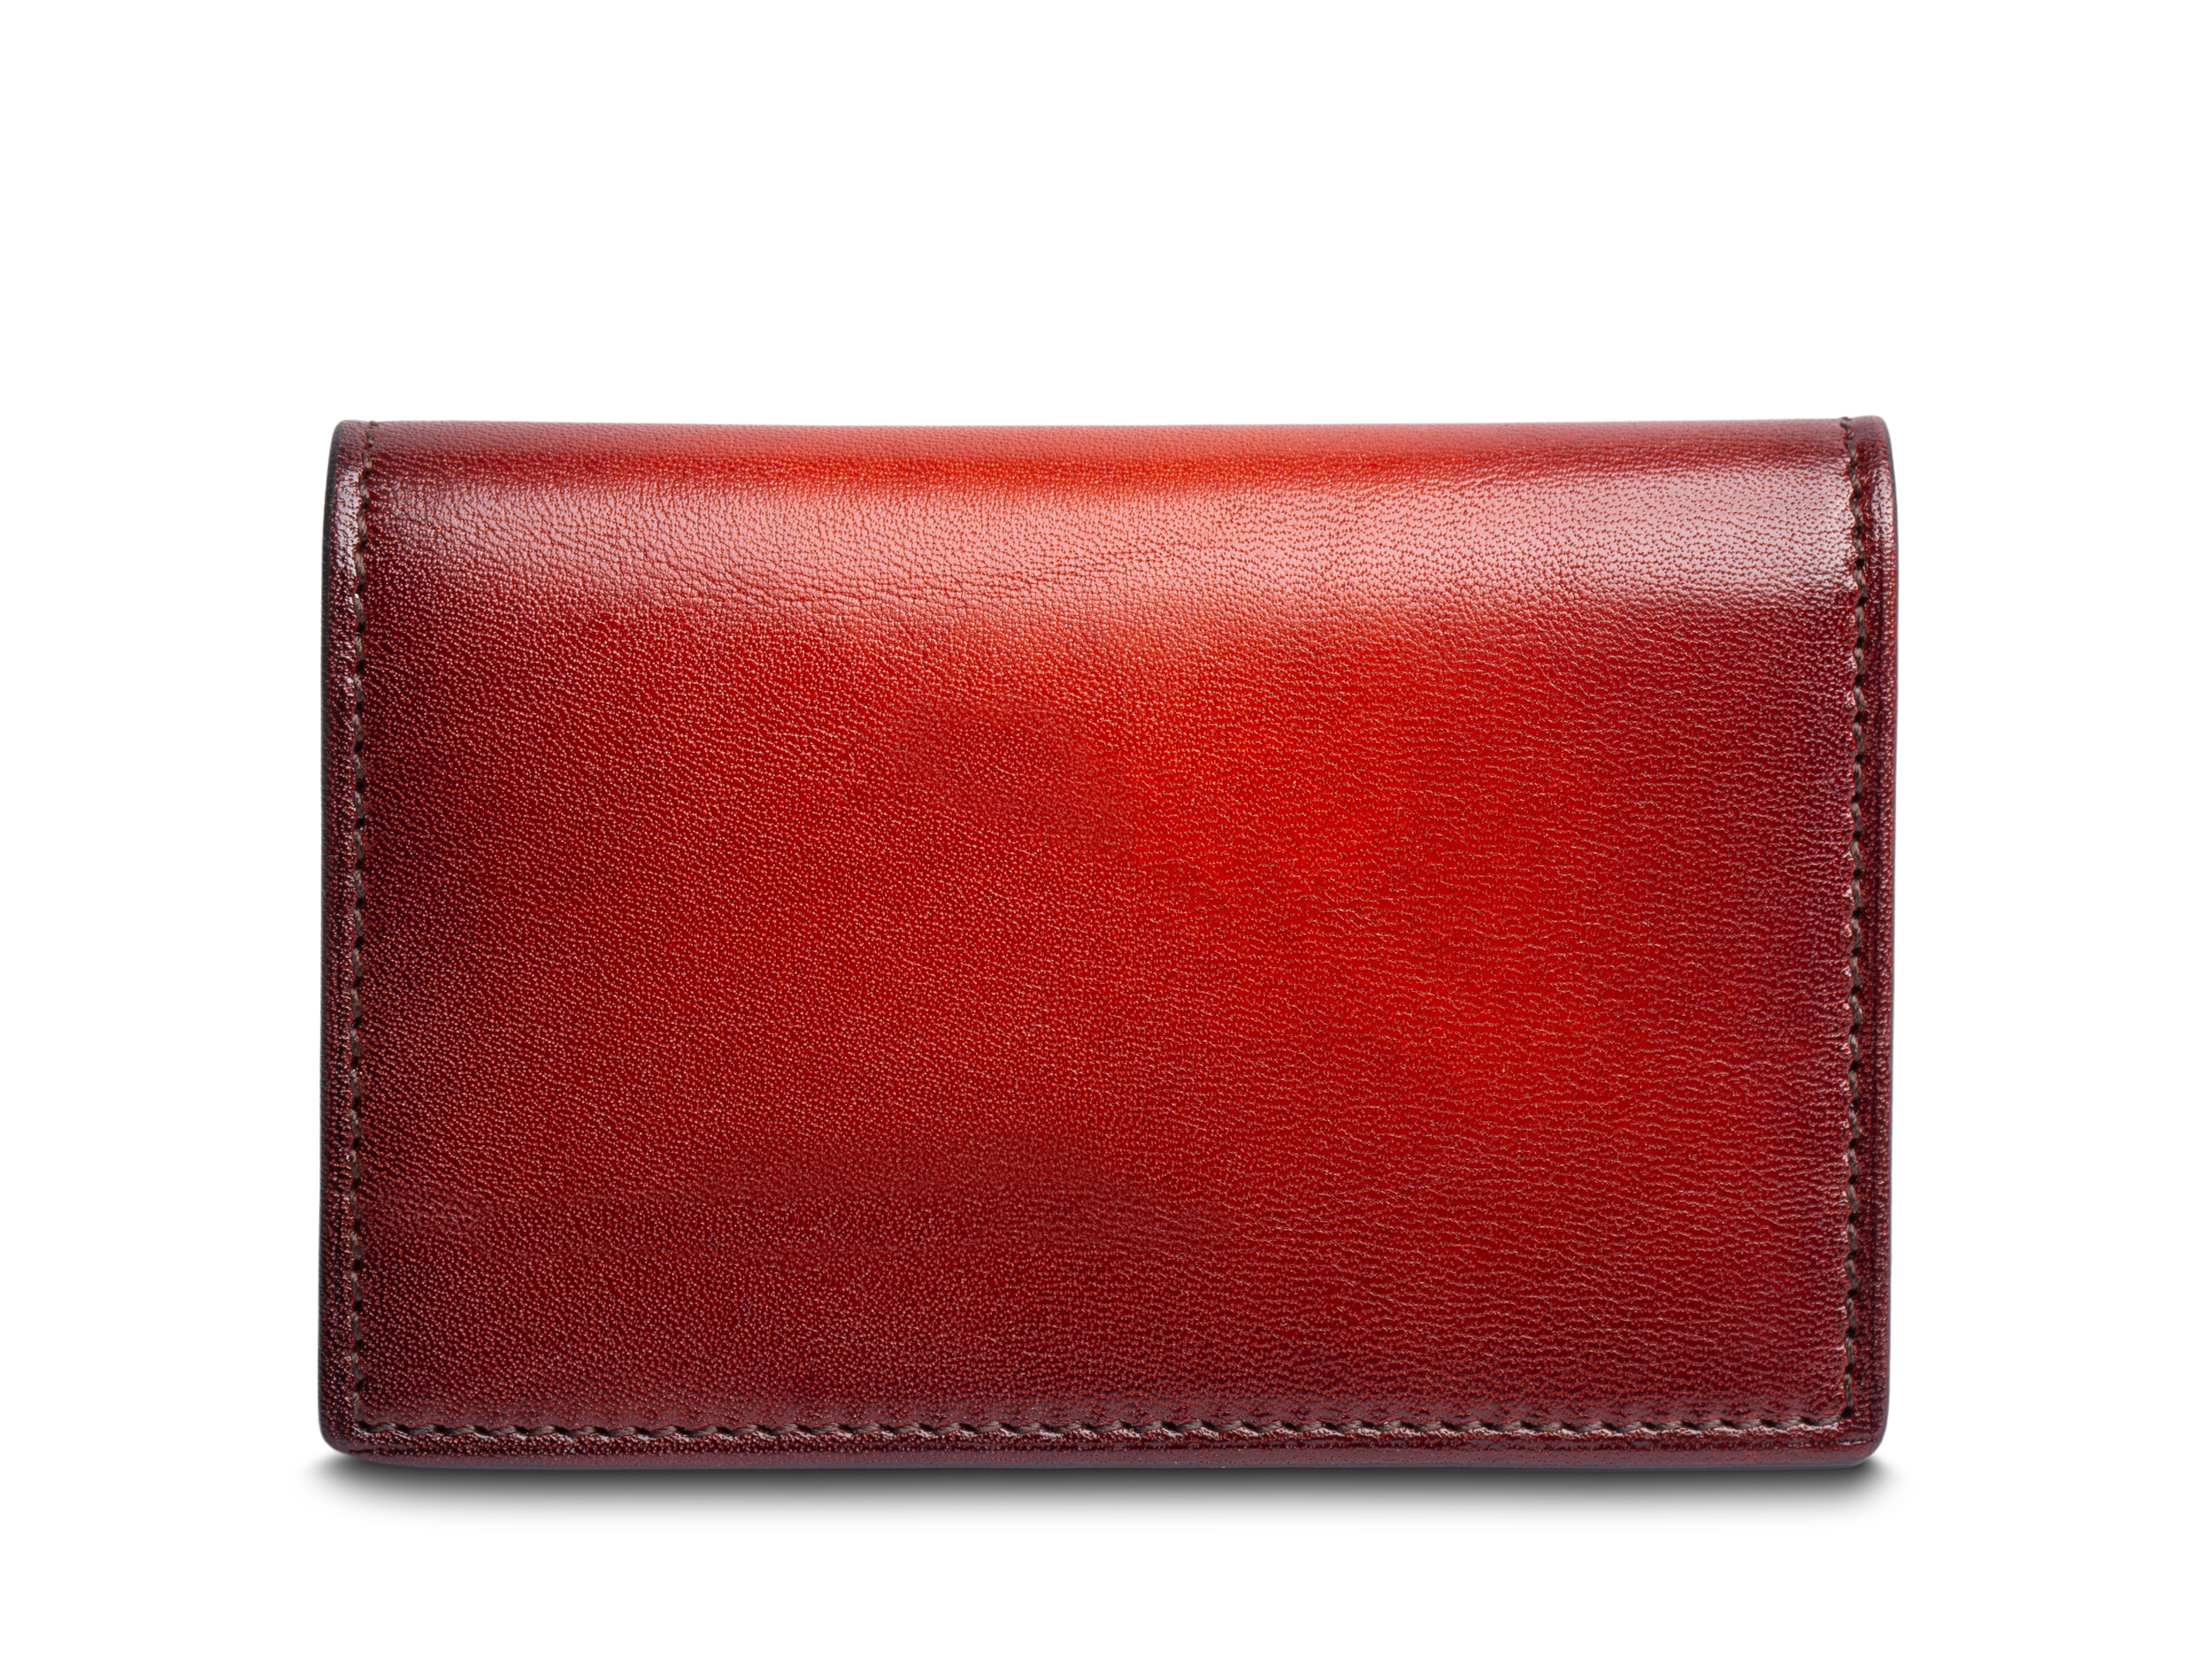 wallet with hand stained treatment